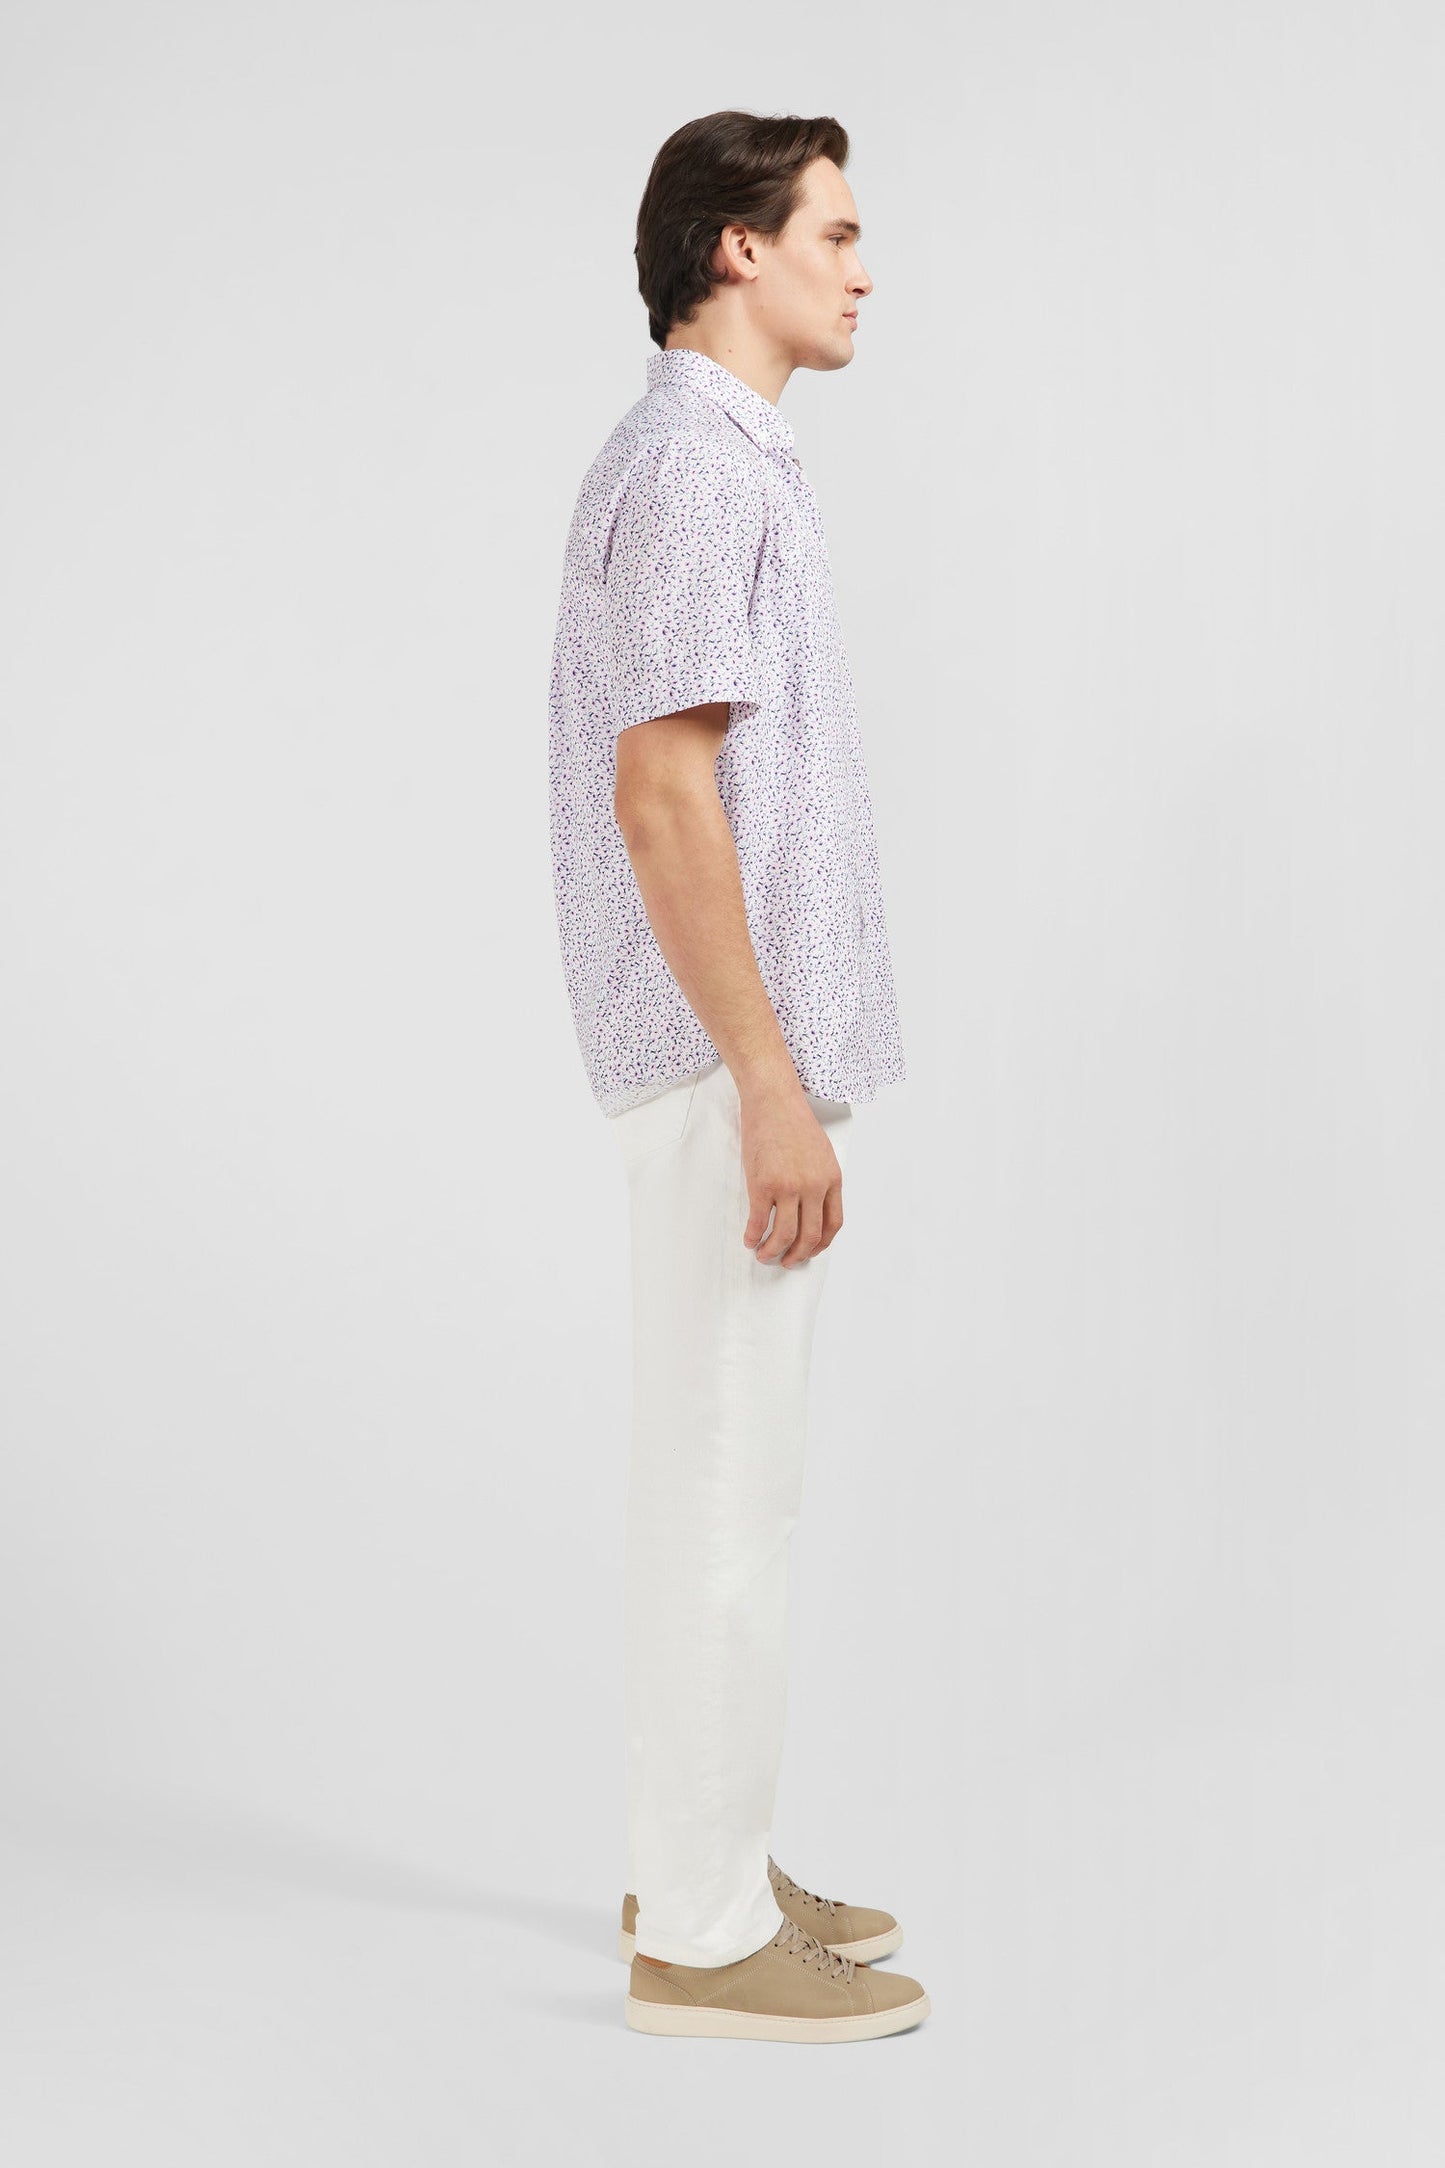 White shirt with exclusive floral print - Image 4